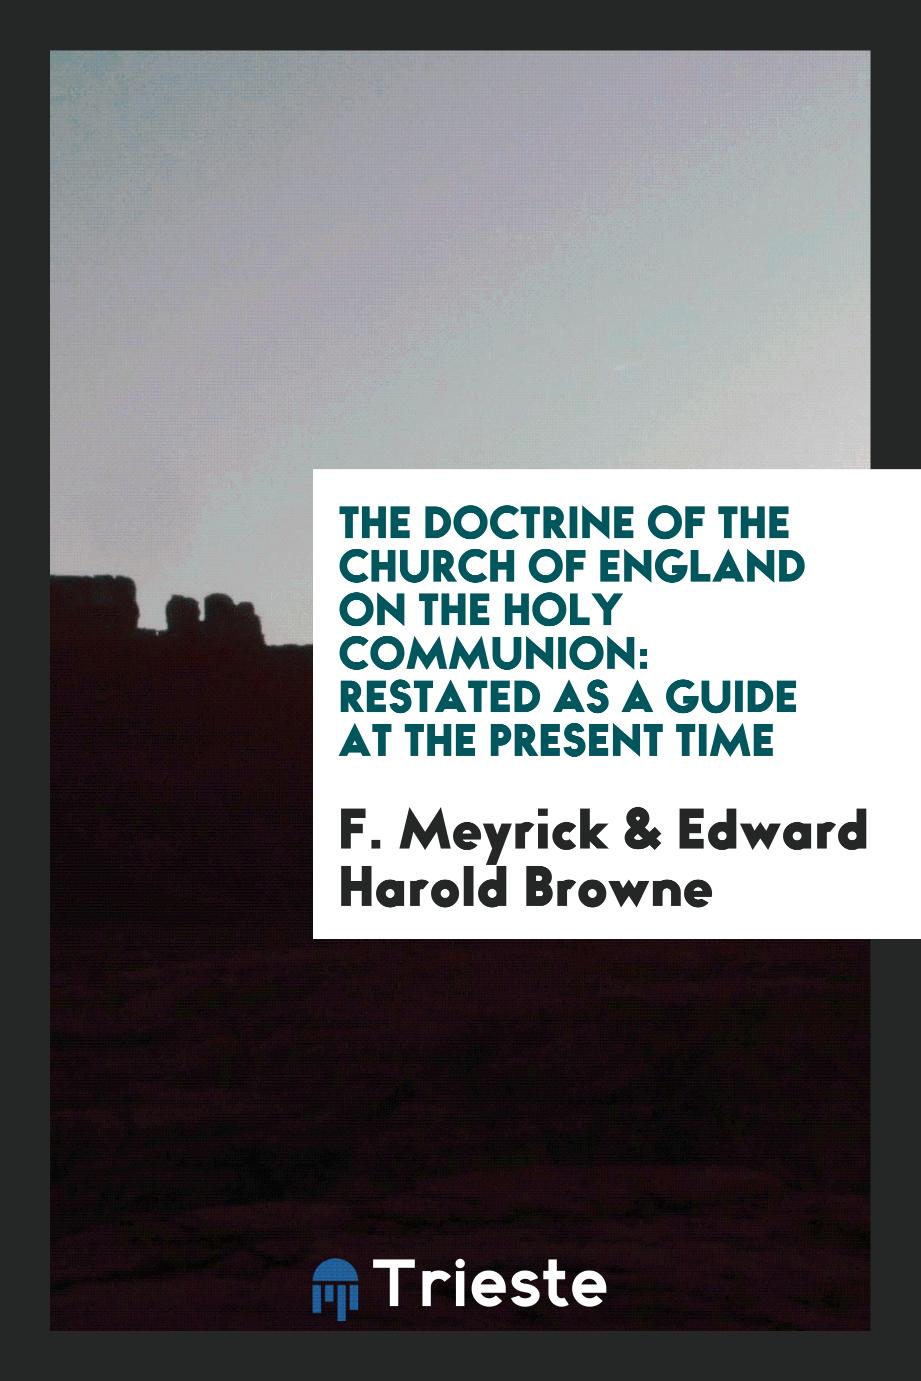 The doctrine of the Church of England on the Holy Communion: restated as a guide at the present time